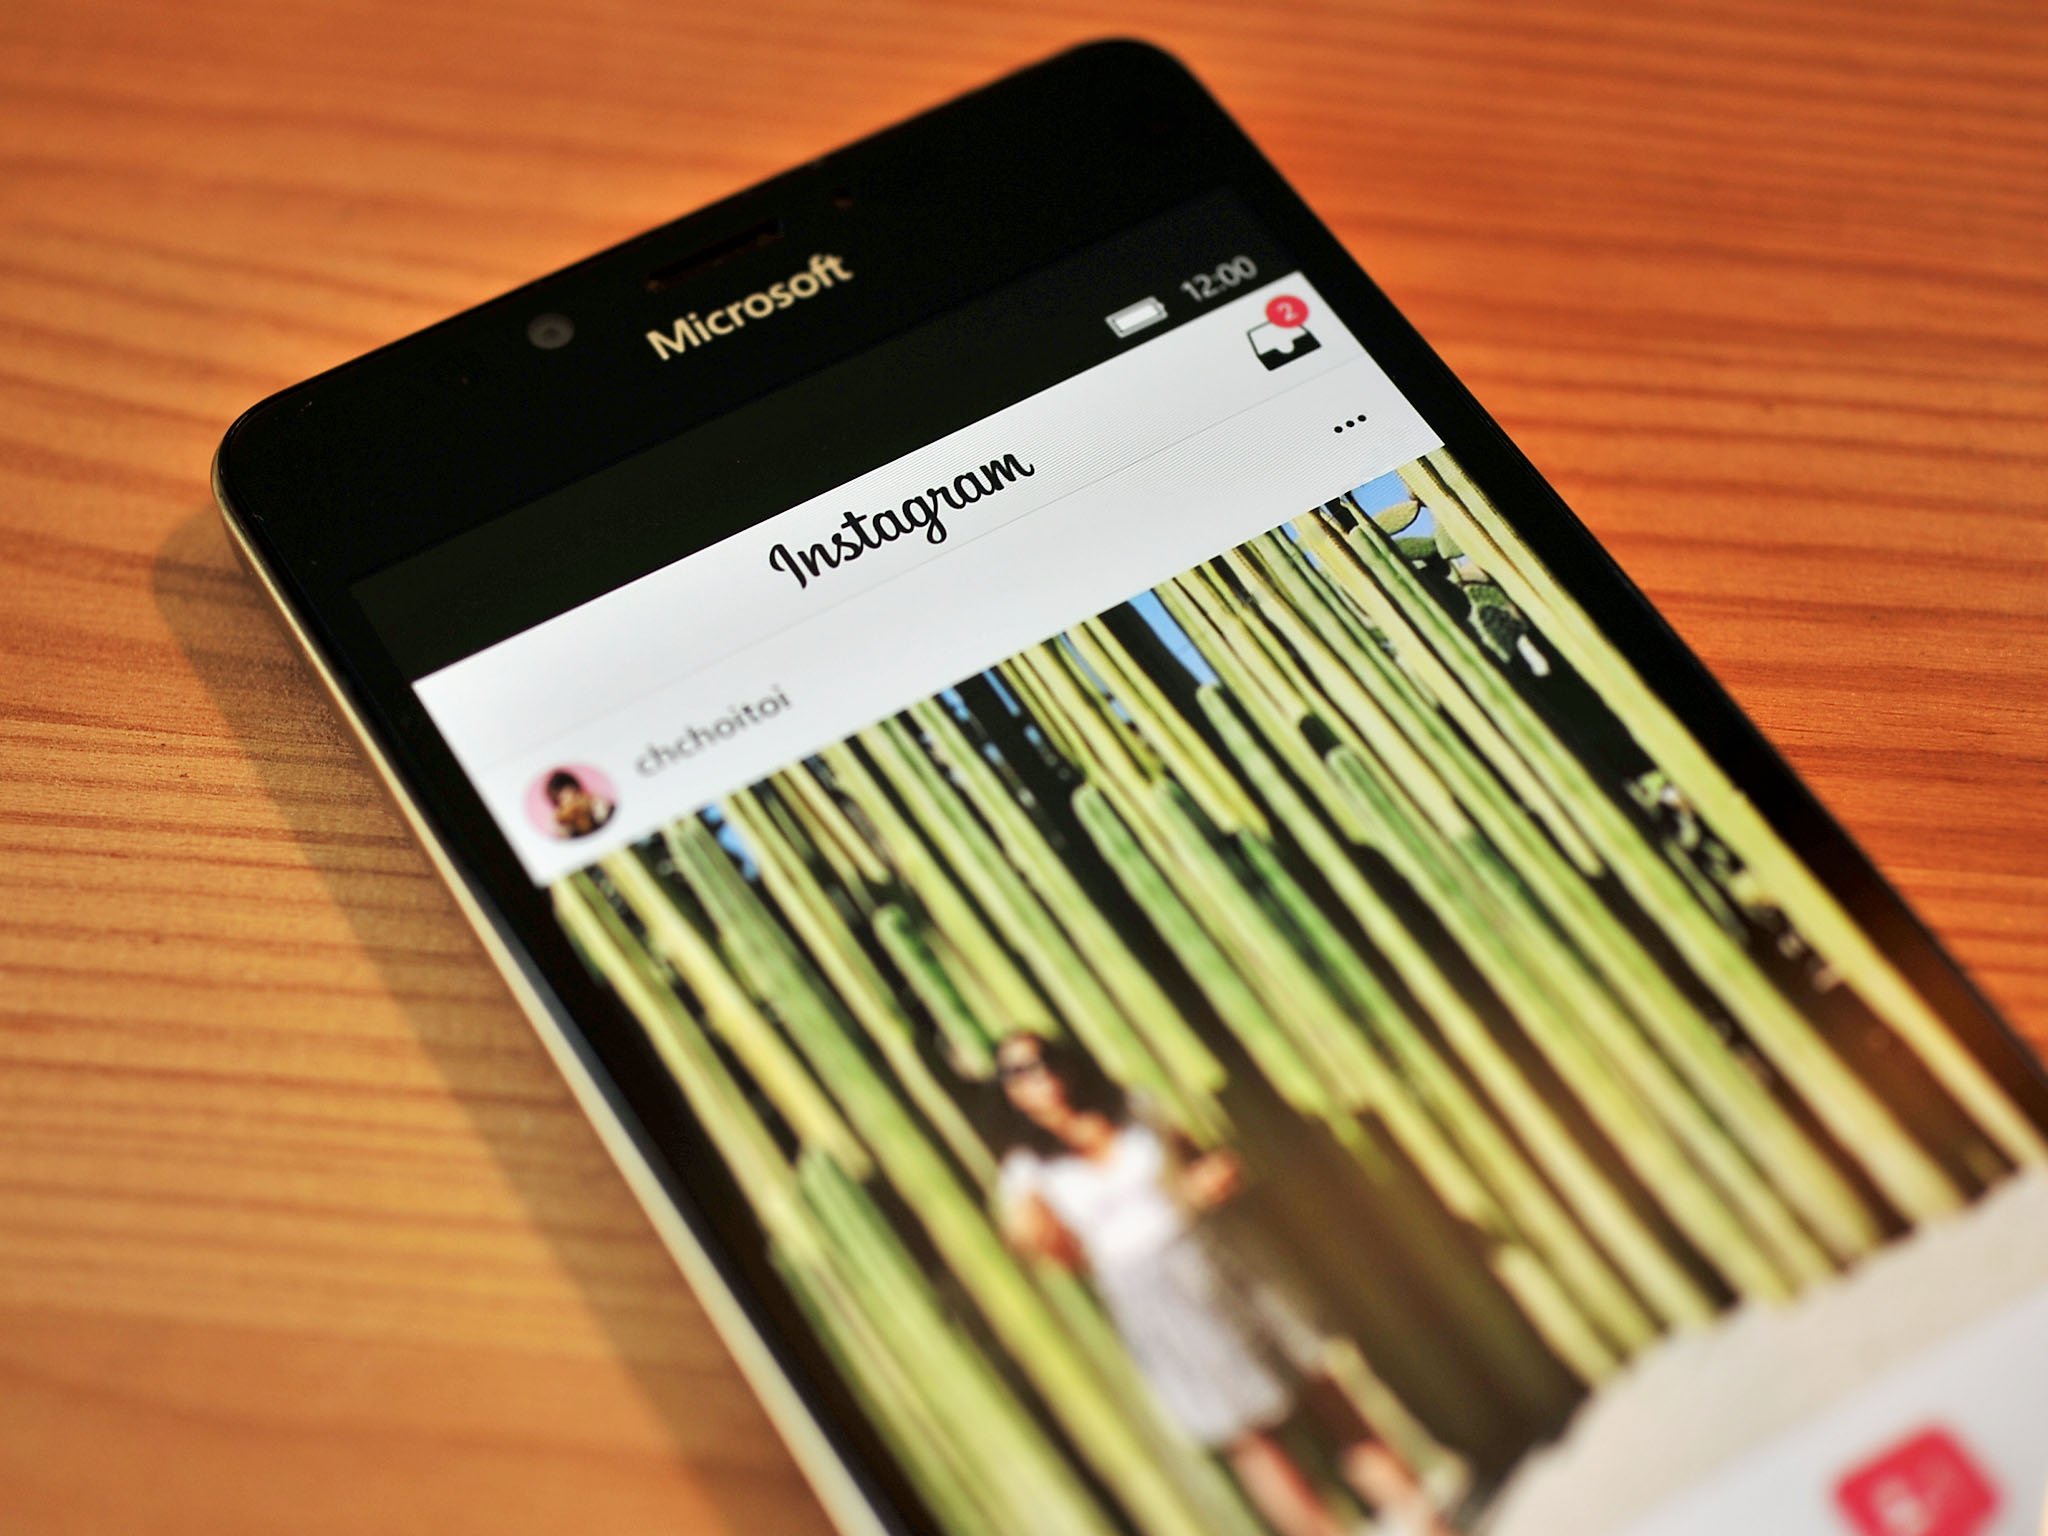 Instagram for Windows phone to retire on April 30